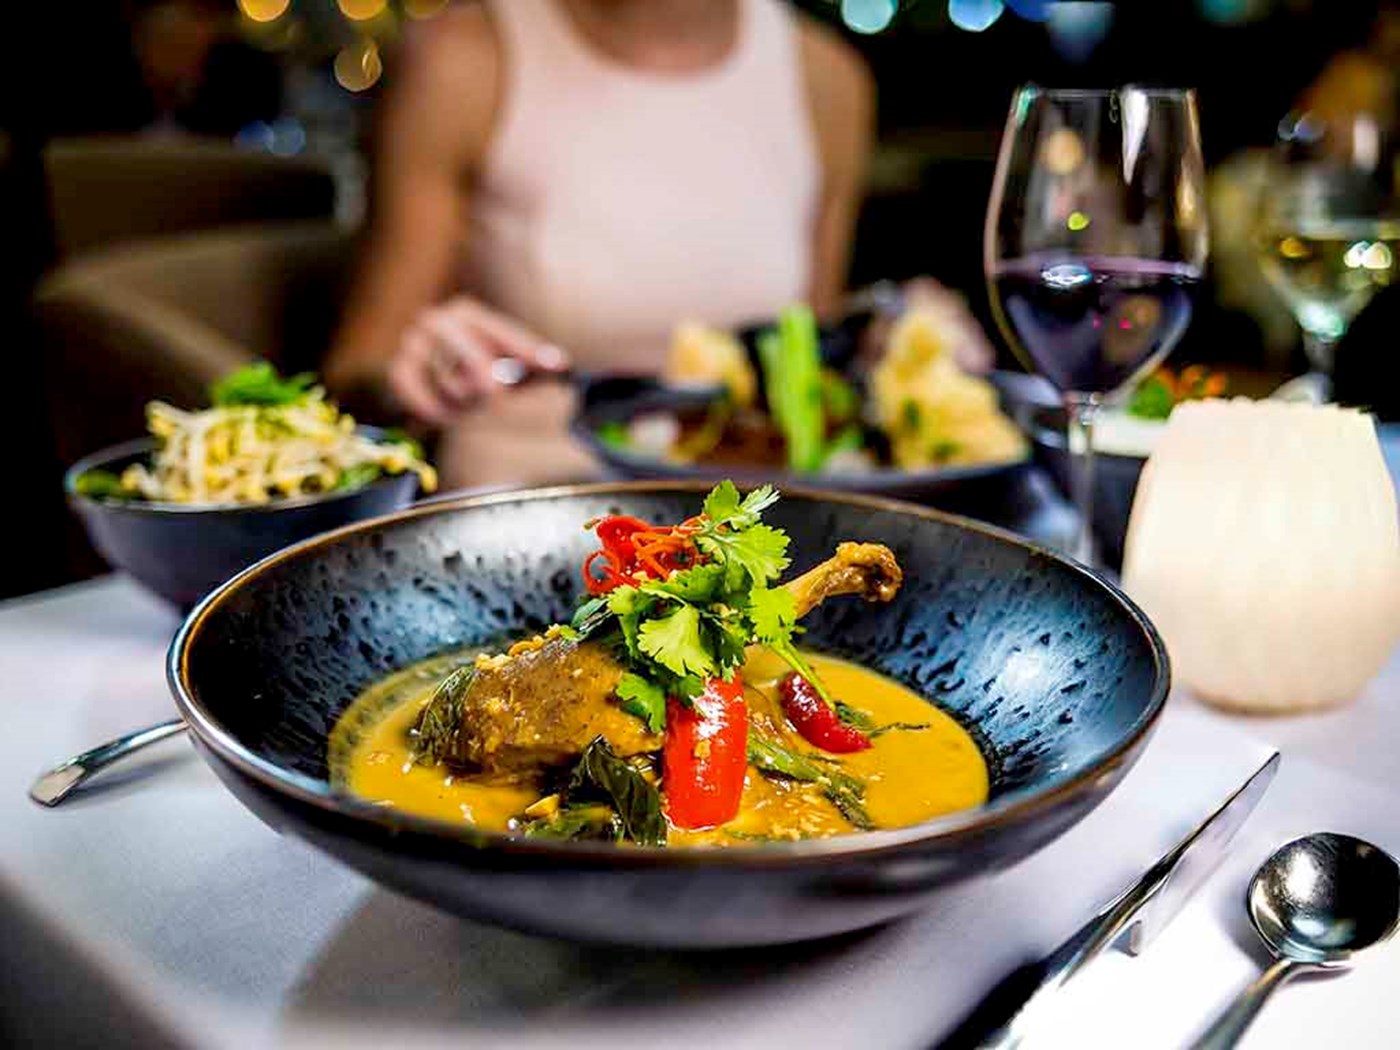 A curry style dish with a quail leg served in a black bowl with a glass of red wine.